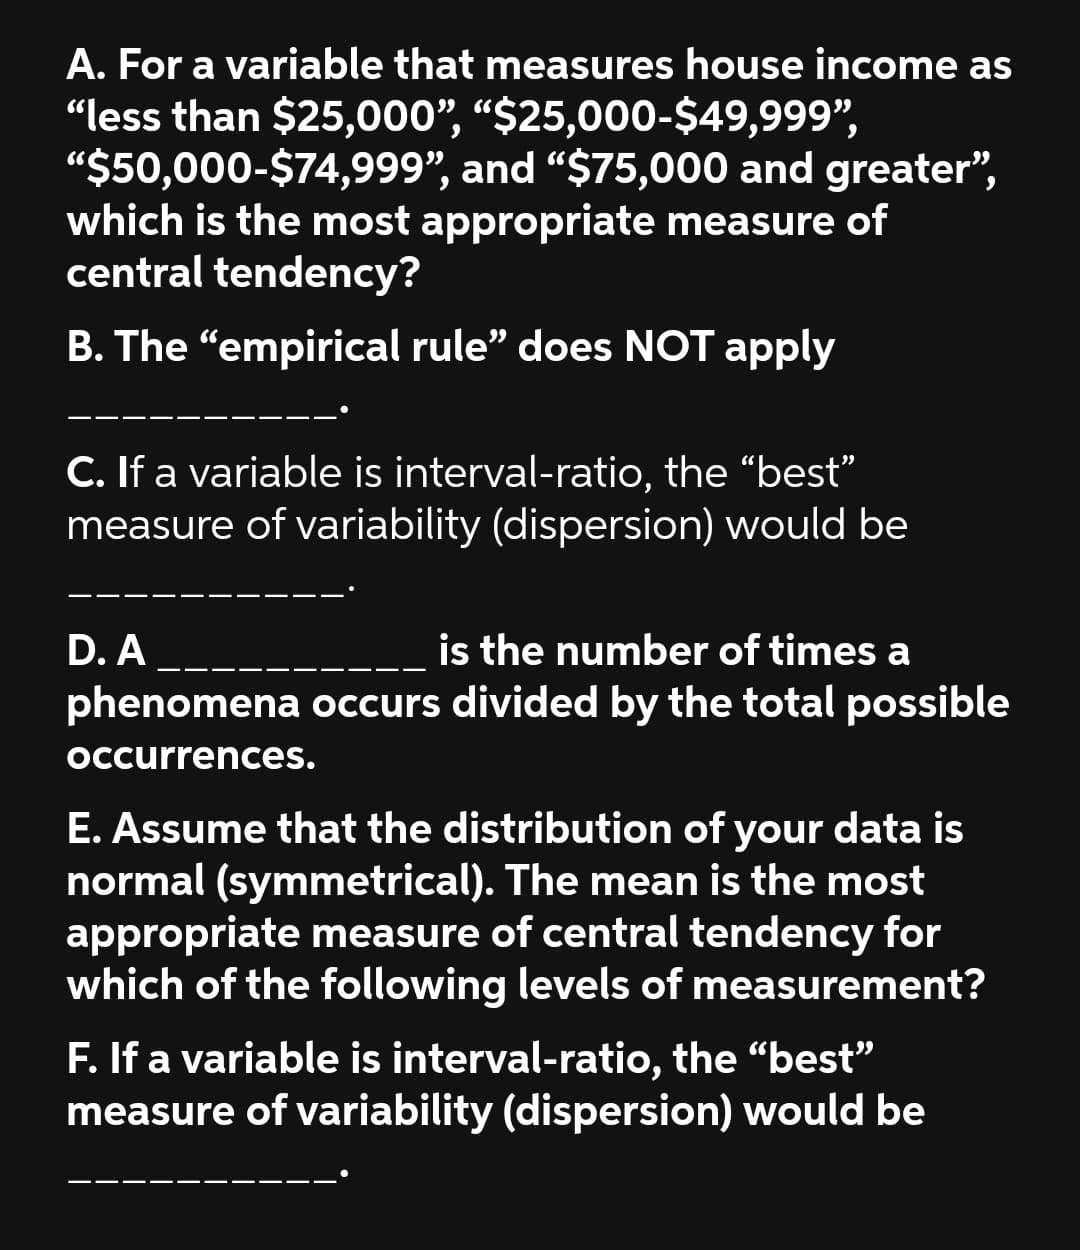 A. For a variable that measures house income as
“less than $25,000", “$25,000-$49,999",
"$50,000-$74,999", and “$75,000 and greater",
which is the most appropriate measure of
central tendency?
B. The "empirical rule" does NOT apply
C. If a variable is interval-ratio, the "best"
measure of variability (dispersion) would be
is the number of times a
phenomena occurs divided by the total possible
D. A
Occurrences.
E. Assume that the distribution of your data is
normal (symmetrical). The mean is the most
appropriate measure of central tendency for
which of the following levels of measurement?
F. If a variable is interval-ratio, the "bestť"
measure of variability (dispersion) would be
